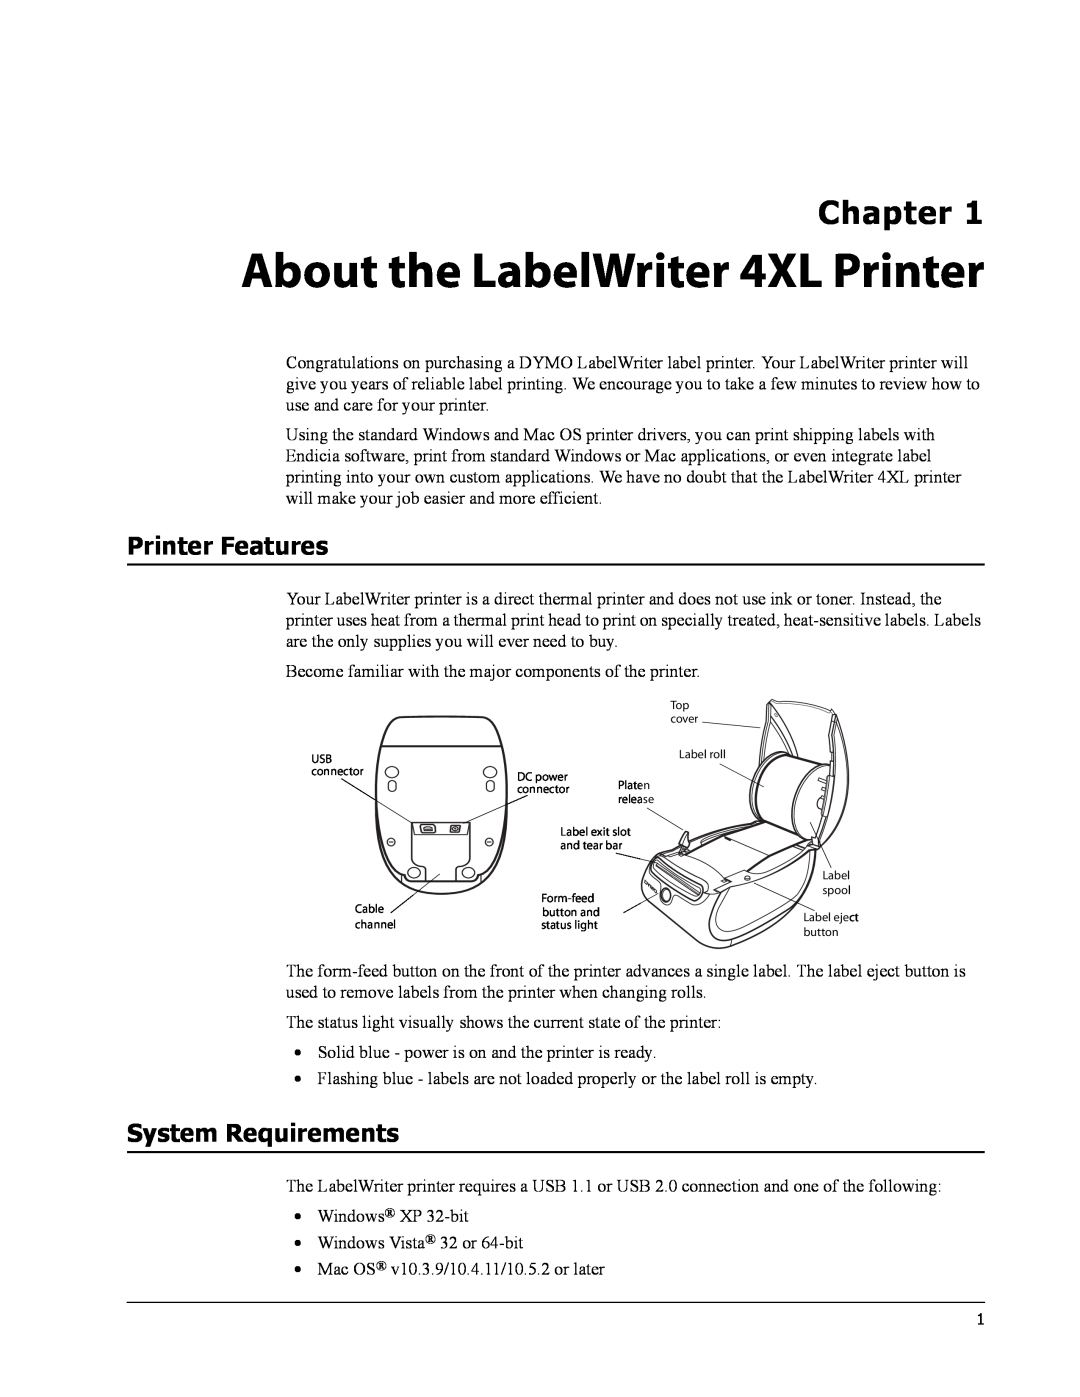 Dymo manual About the LabelWriter 4XL Printer, Chapter, Printer Features, System Requirements 